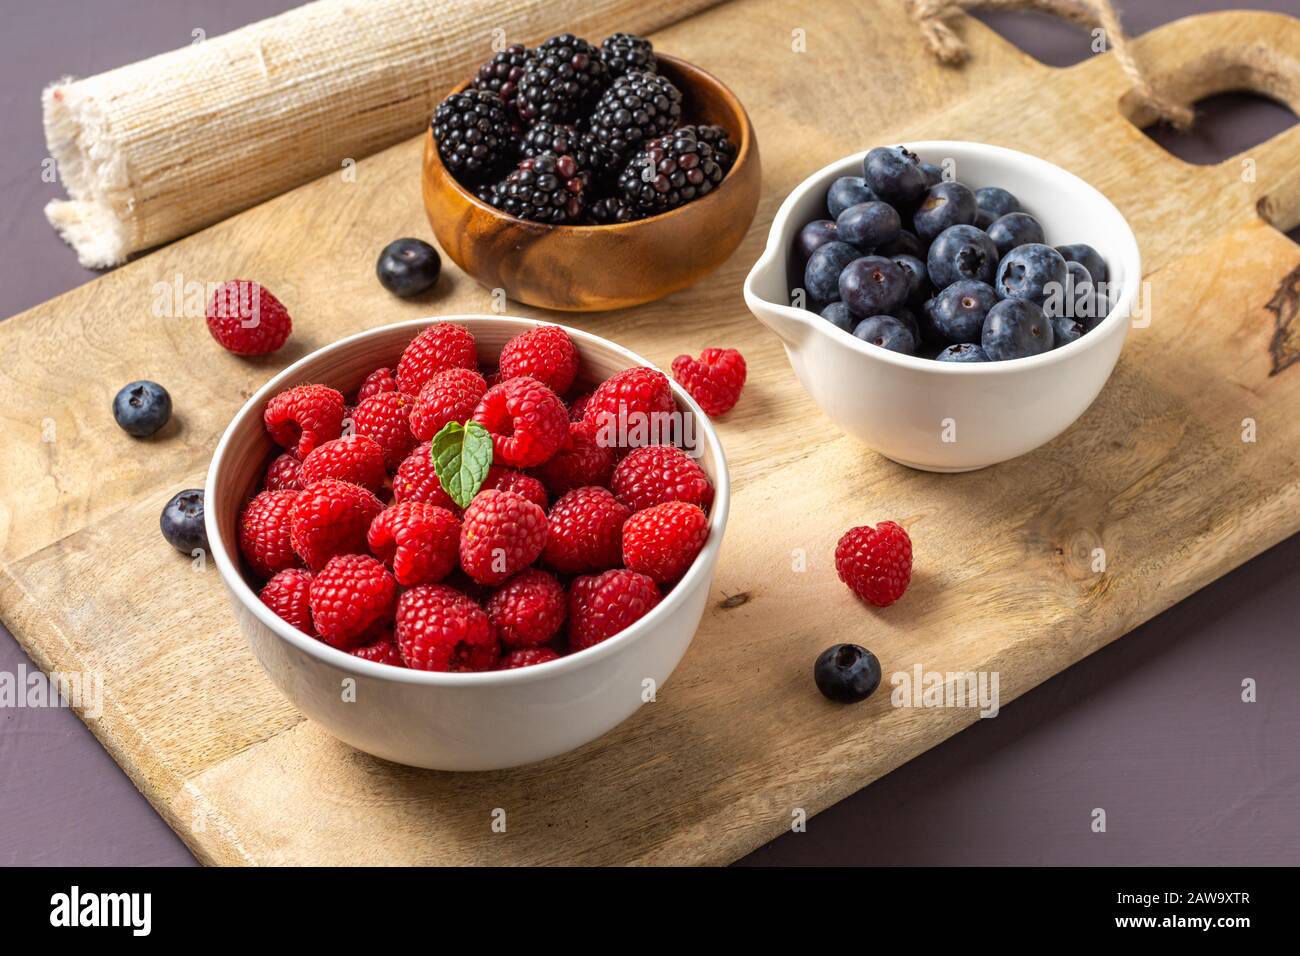 three bowls with wild berries, raspberry, blueberries, blackberries, on rustic wooden background Stock Photo